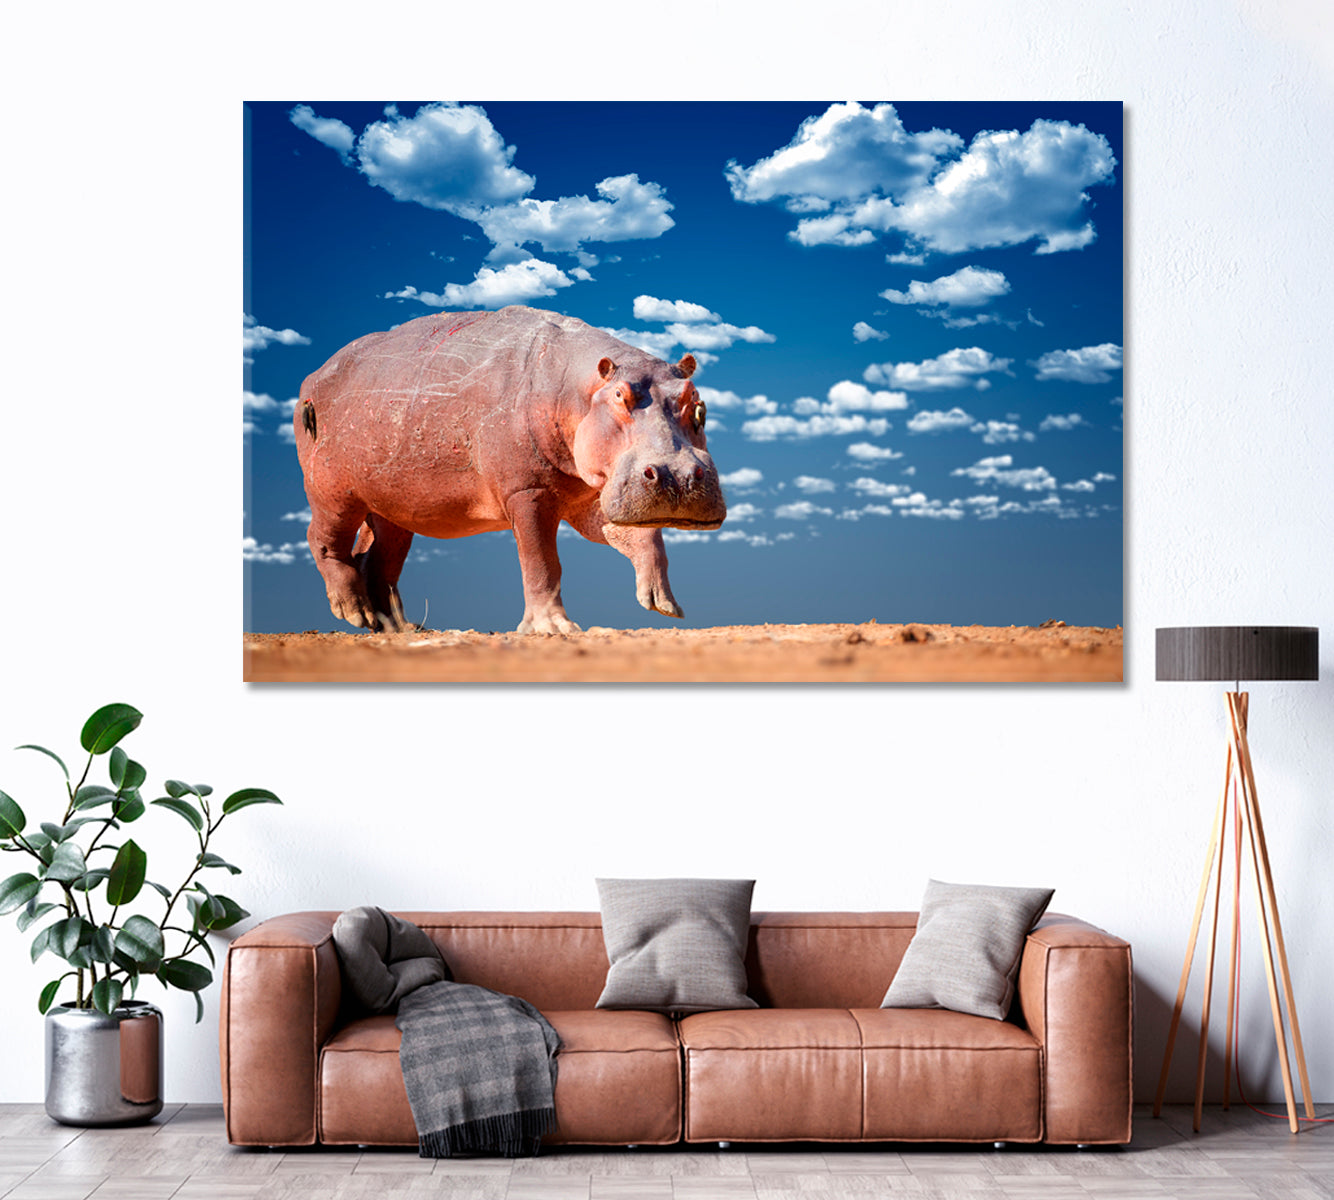 Hippo in Mana Pools National Park Zimbabwe Canvas Print ArtLexy 1 Panel 24"x16" inches 